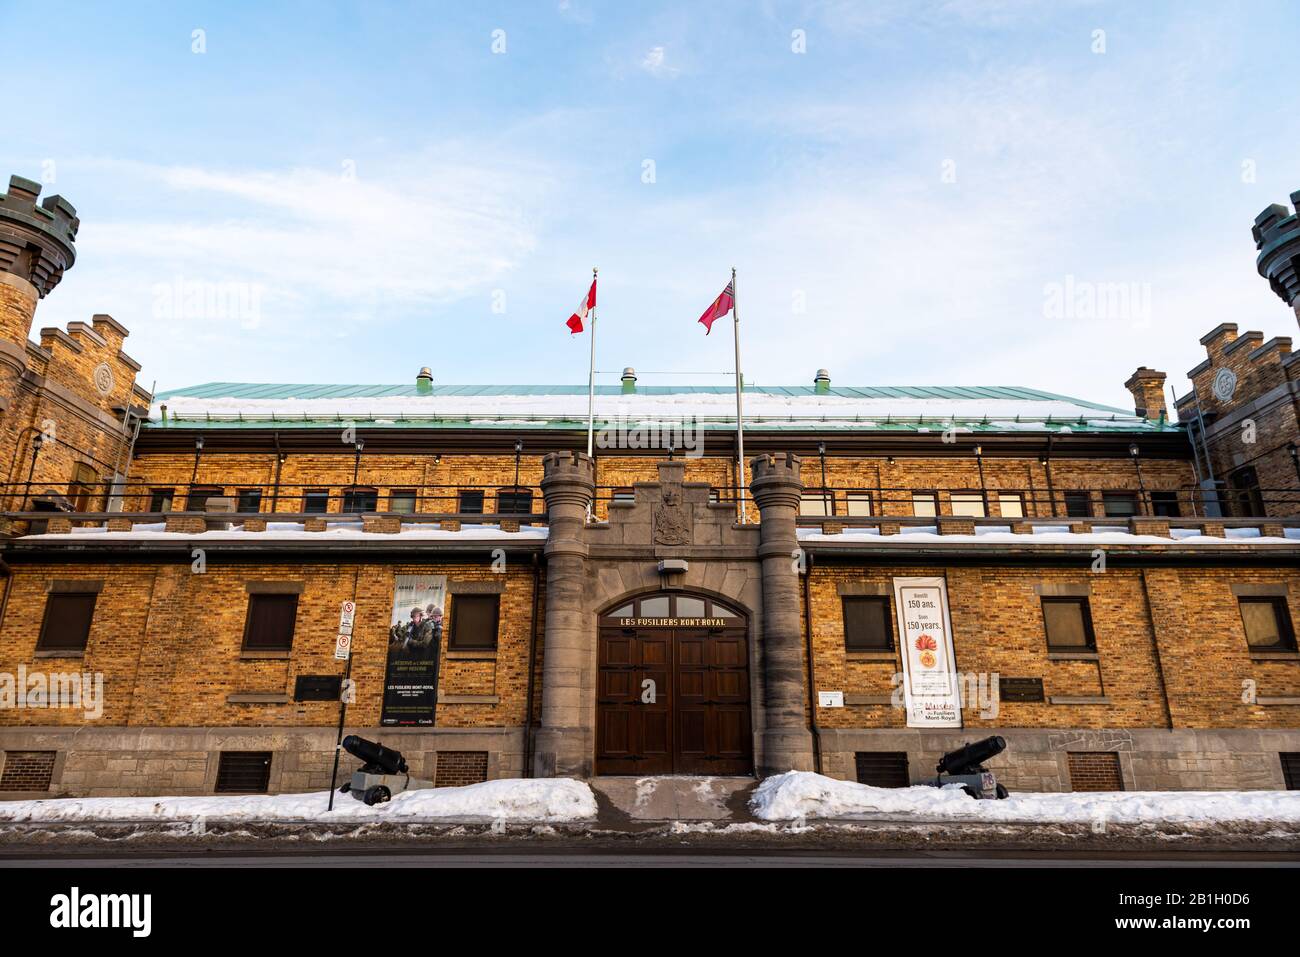 Montreal Quebec Canada February 24 2020: Musée des Fusiliers Mont-Royal and armories of the Canadian armed forces Stock Photo